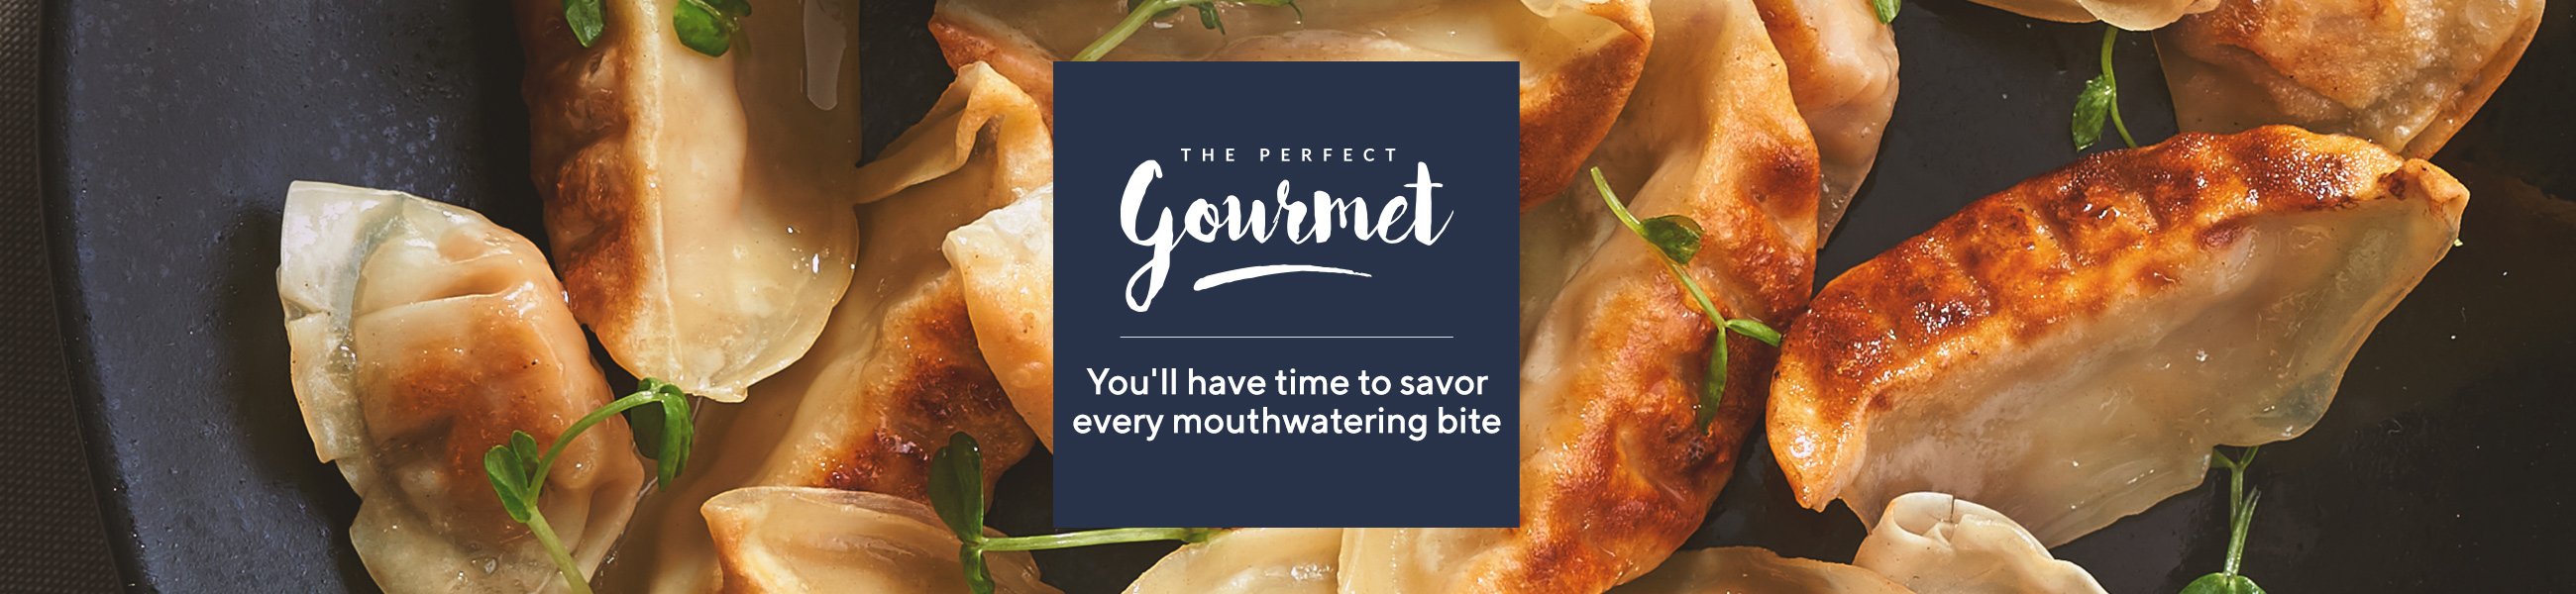 The Perfect Gourmet  You'll have time to savor every mouthwatering bite